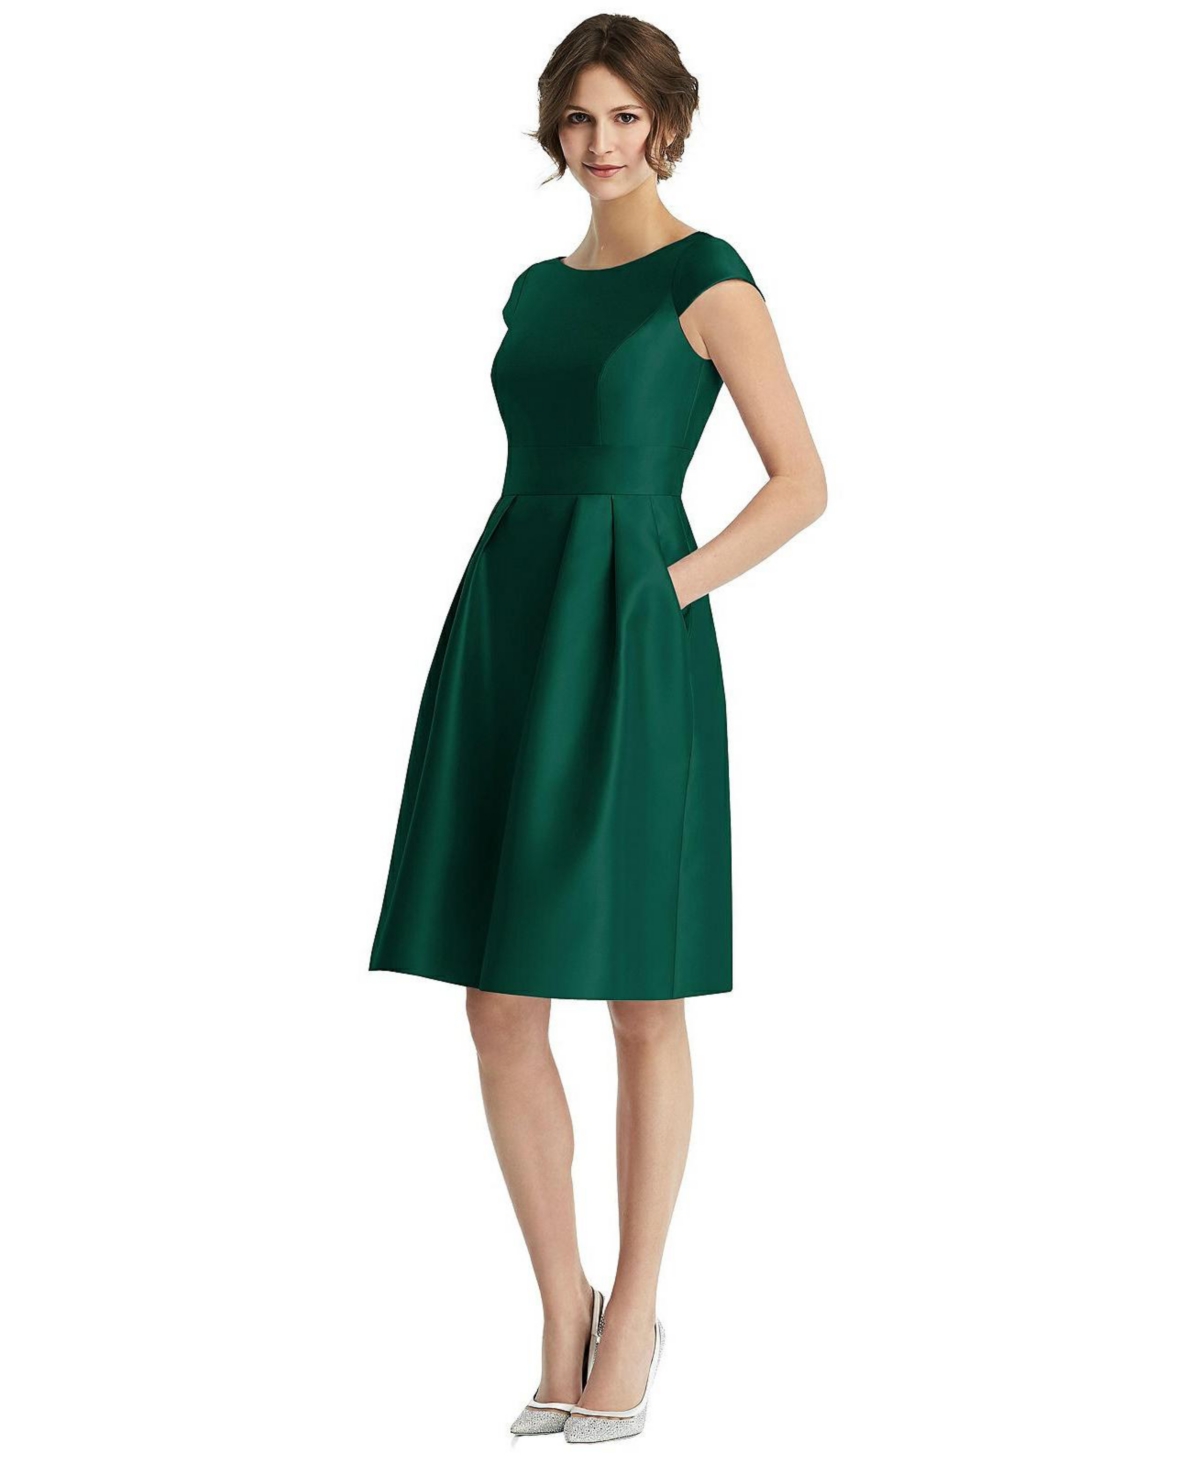 Womens Cap Sleeve Pleated Cocktail Dress with Pockets - Hunter green